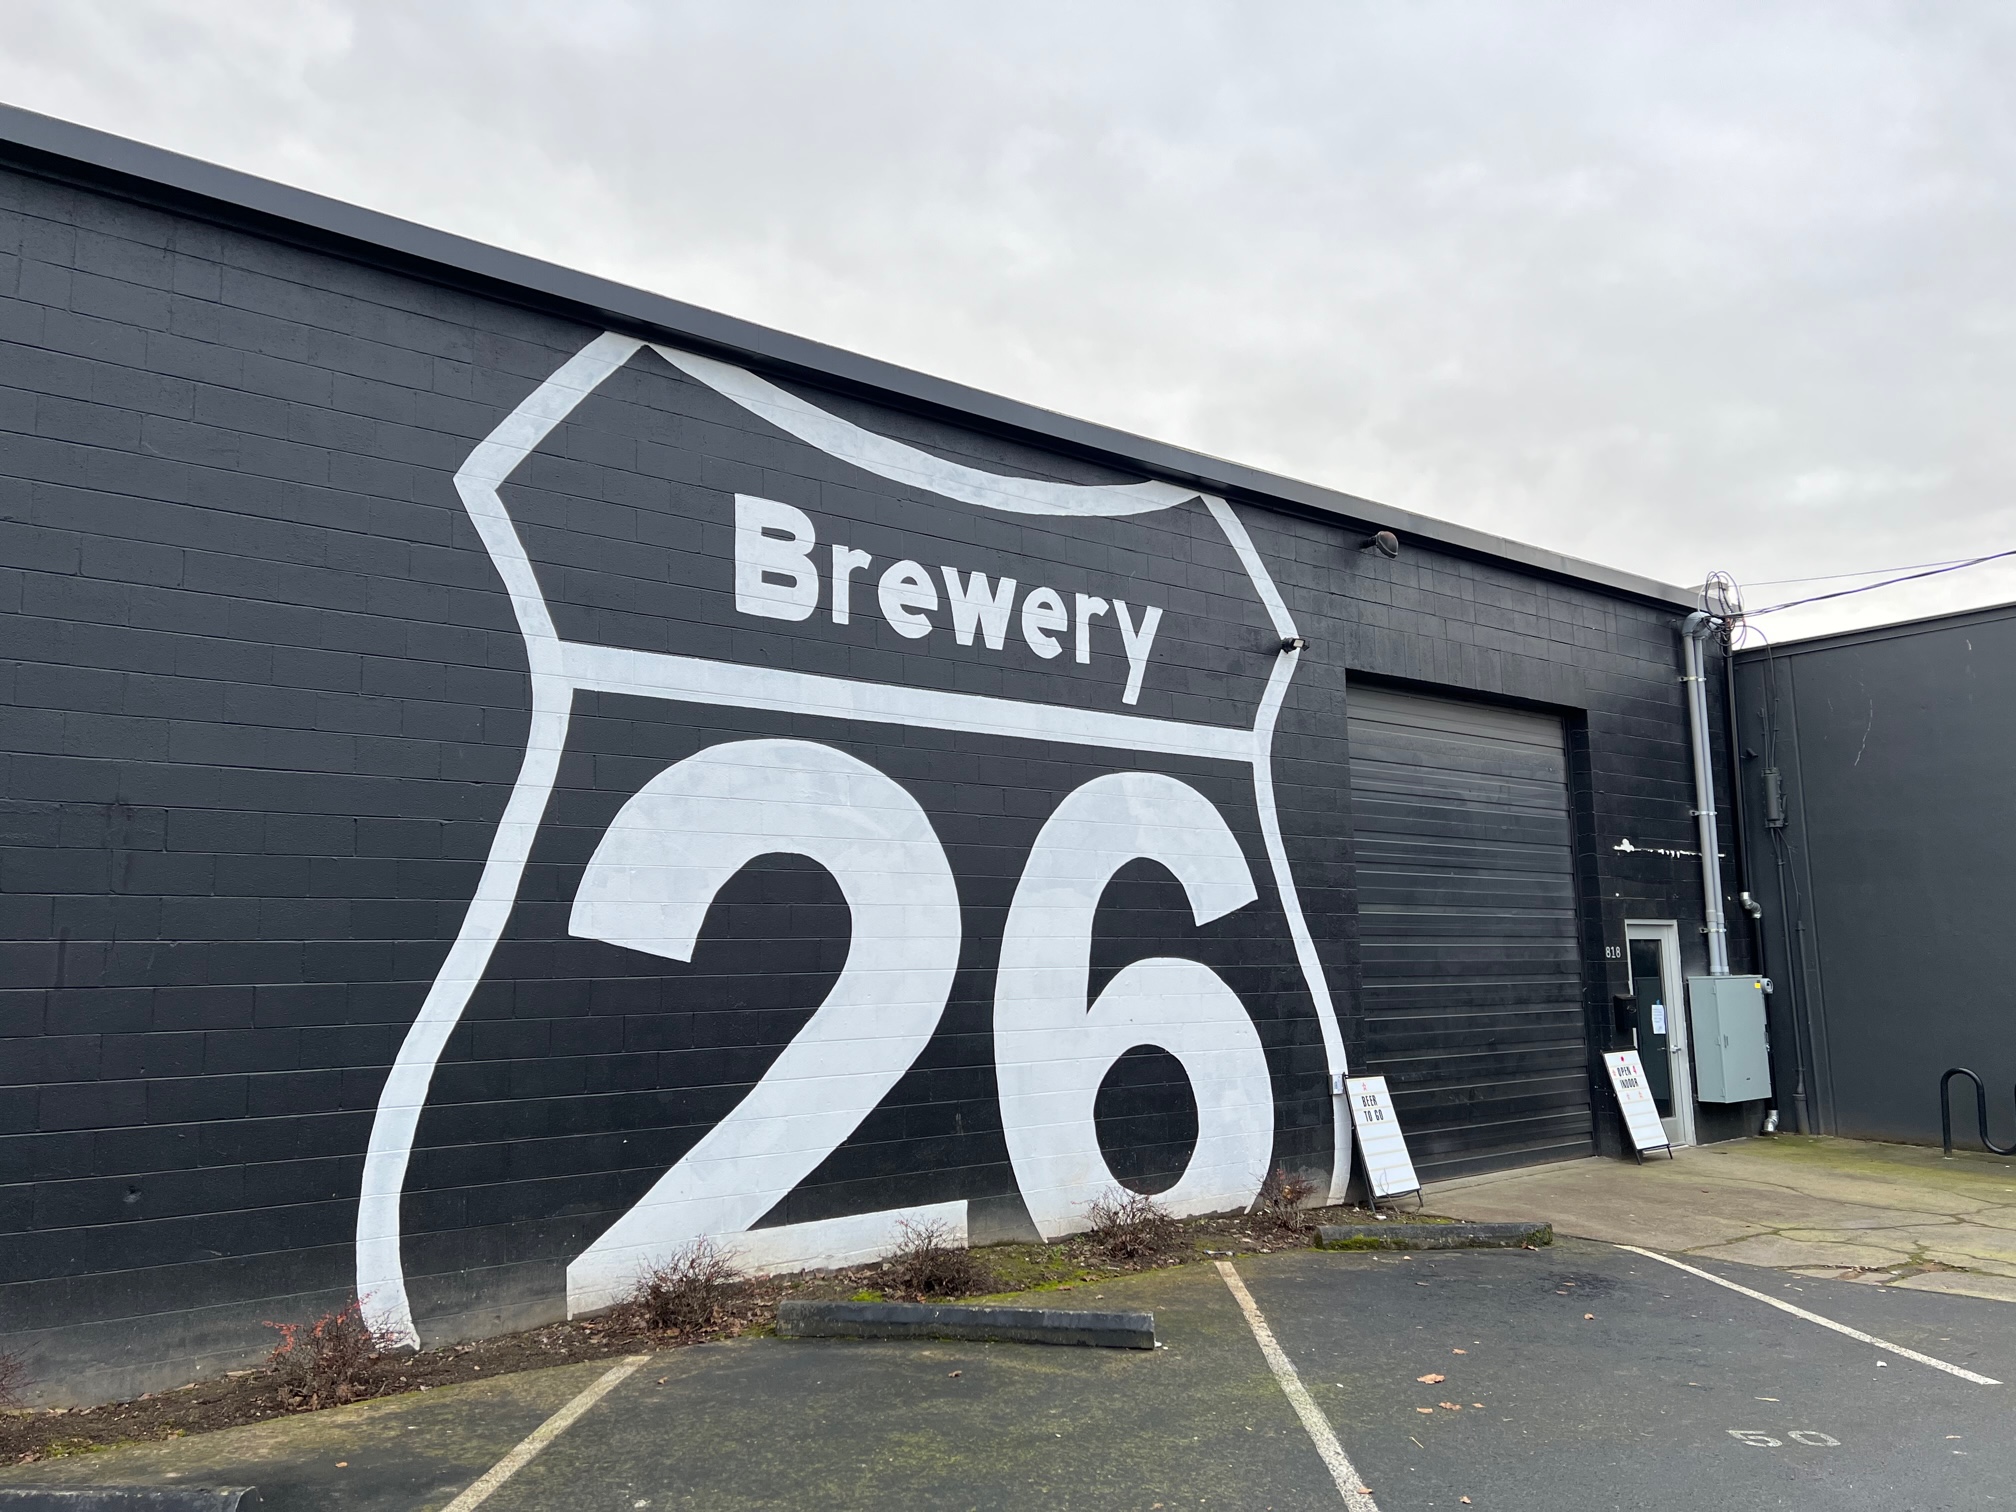 Brewery 26 had opened its taproom inside its production brewery in Southeast Portland.